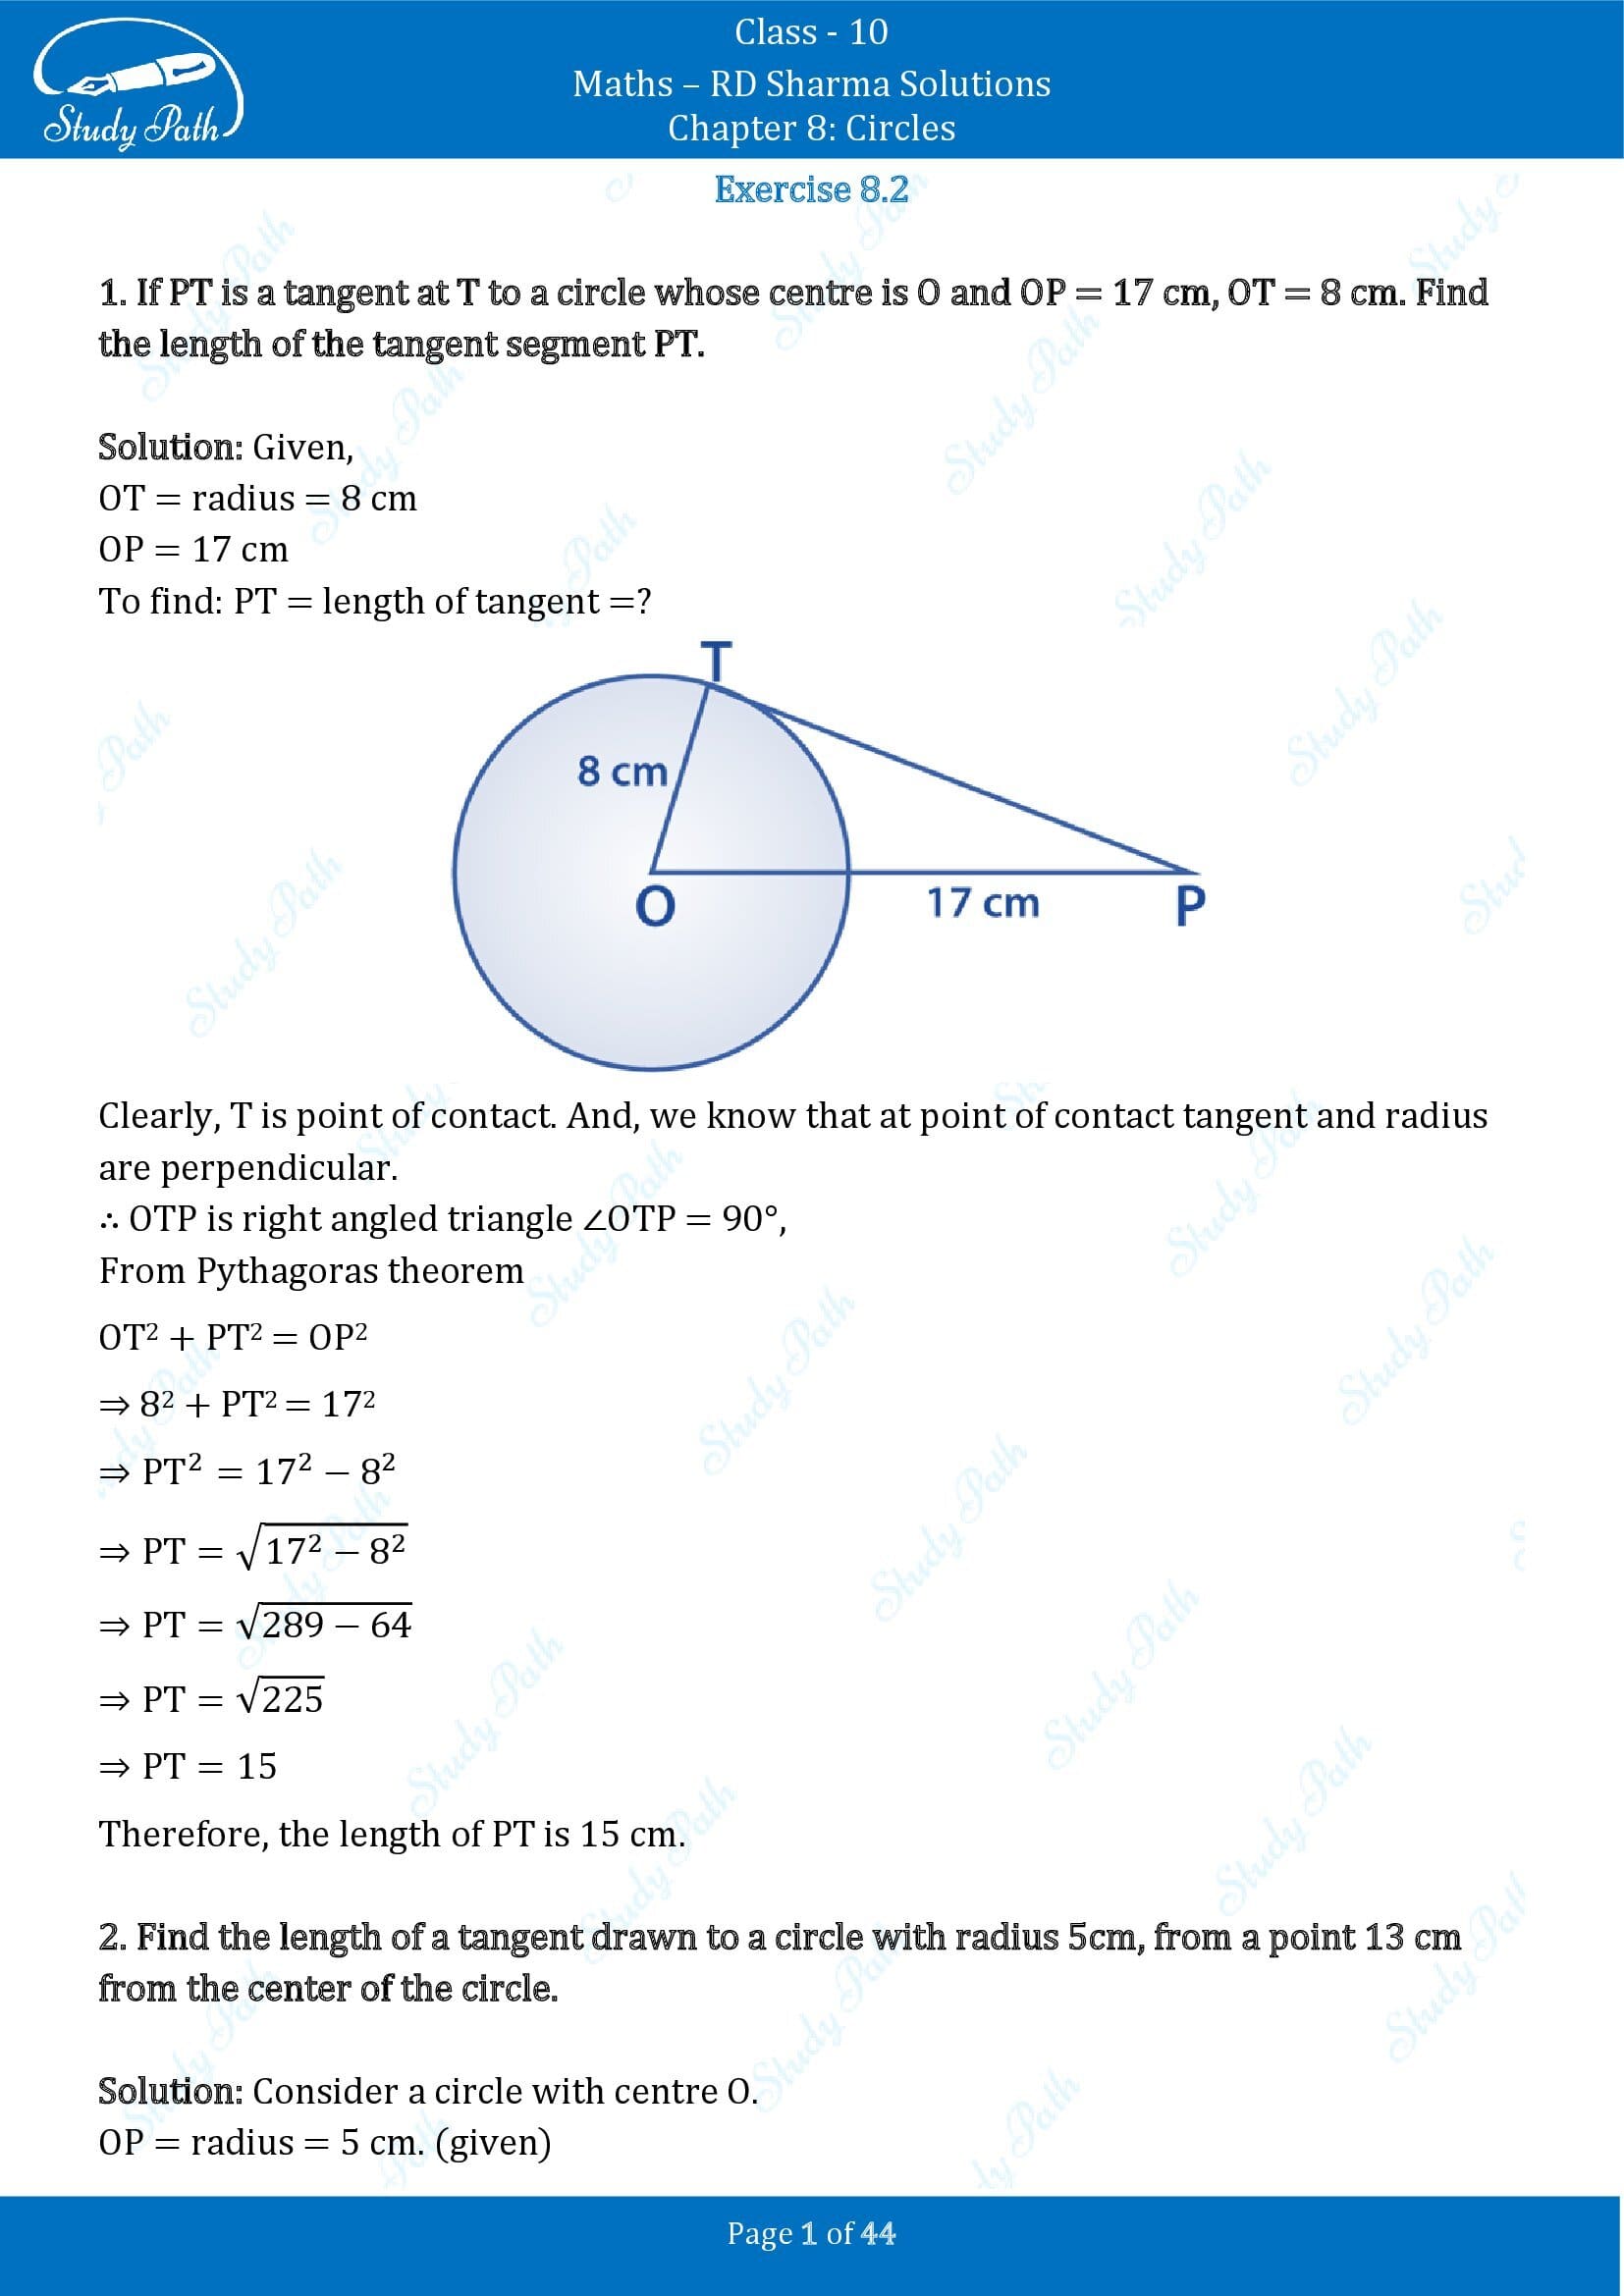 RD Sharma Solutions Class 10 Chapter 8 Circles Exercise 8.2 00001